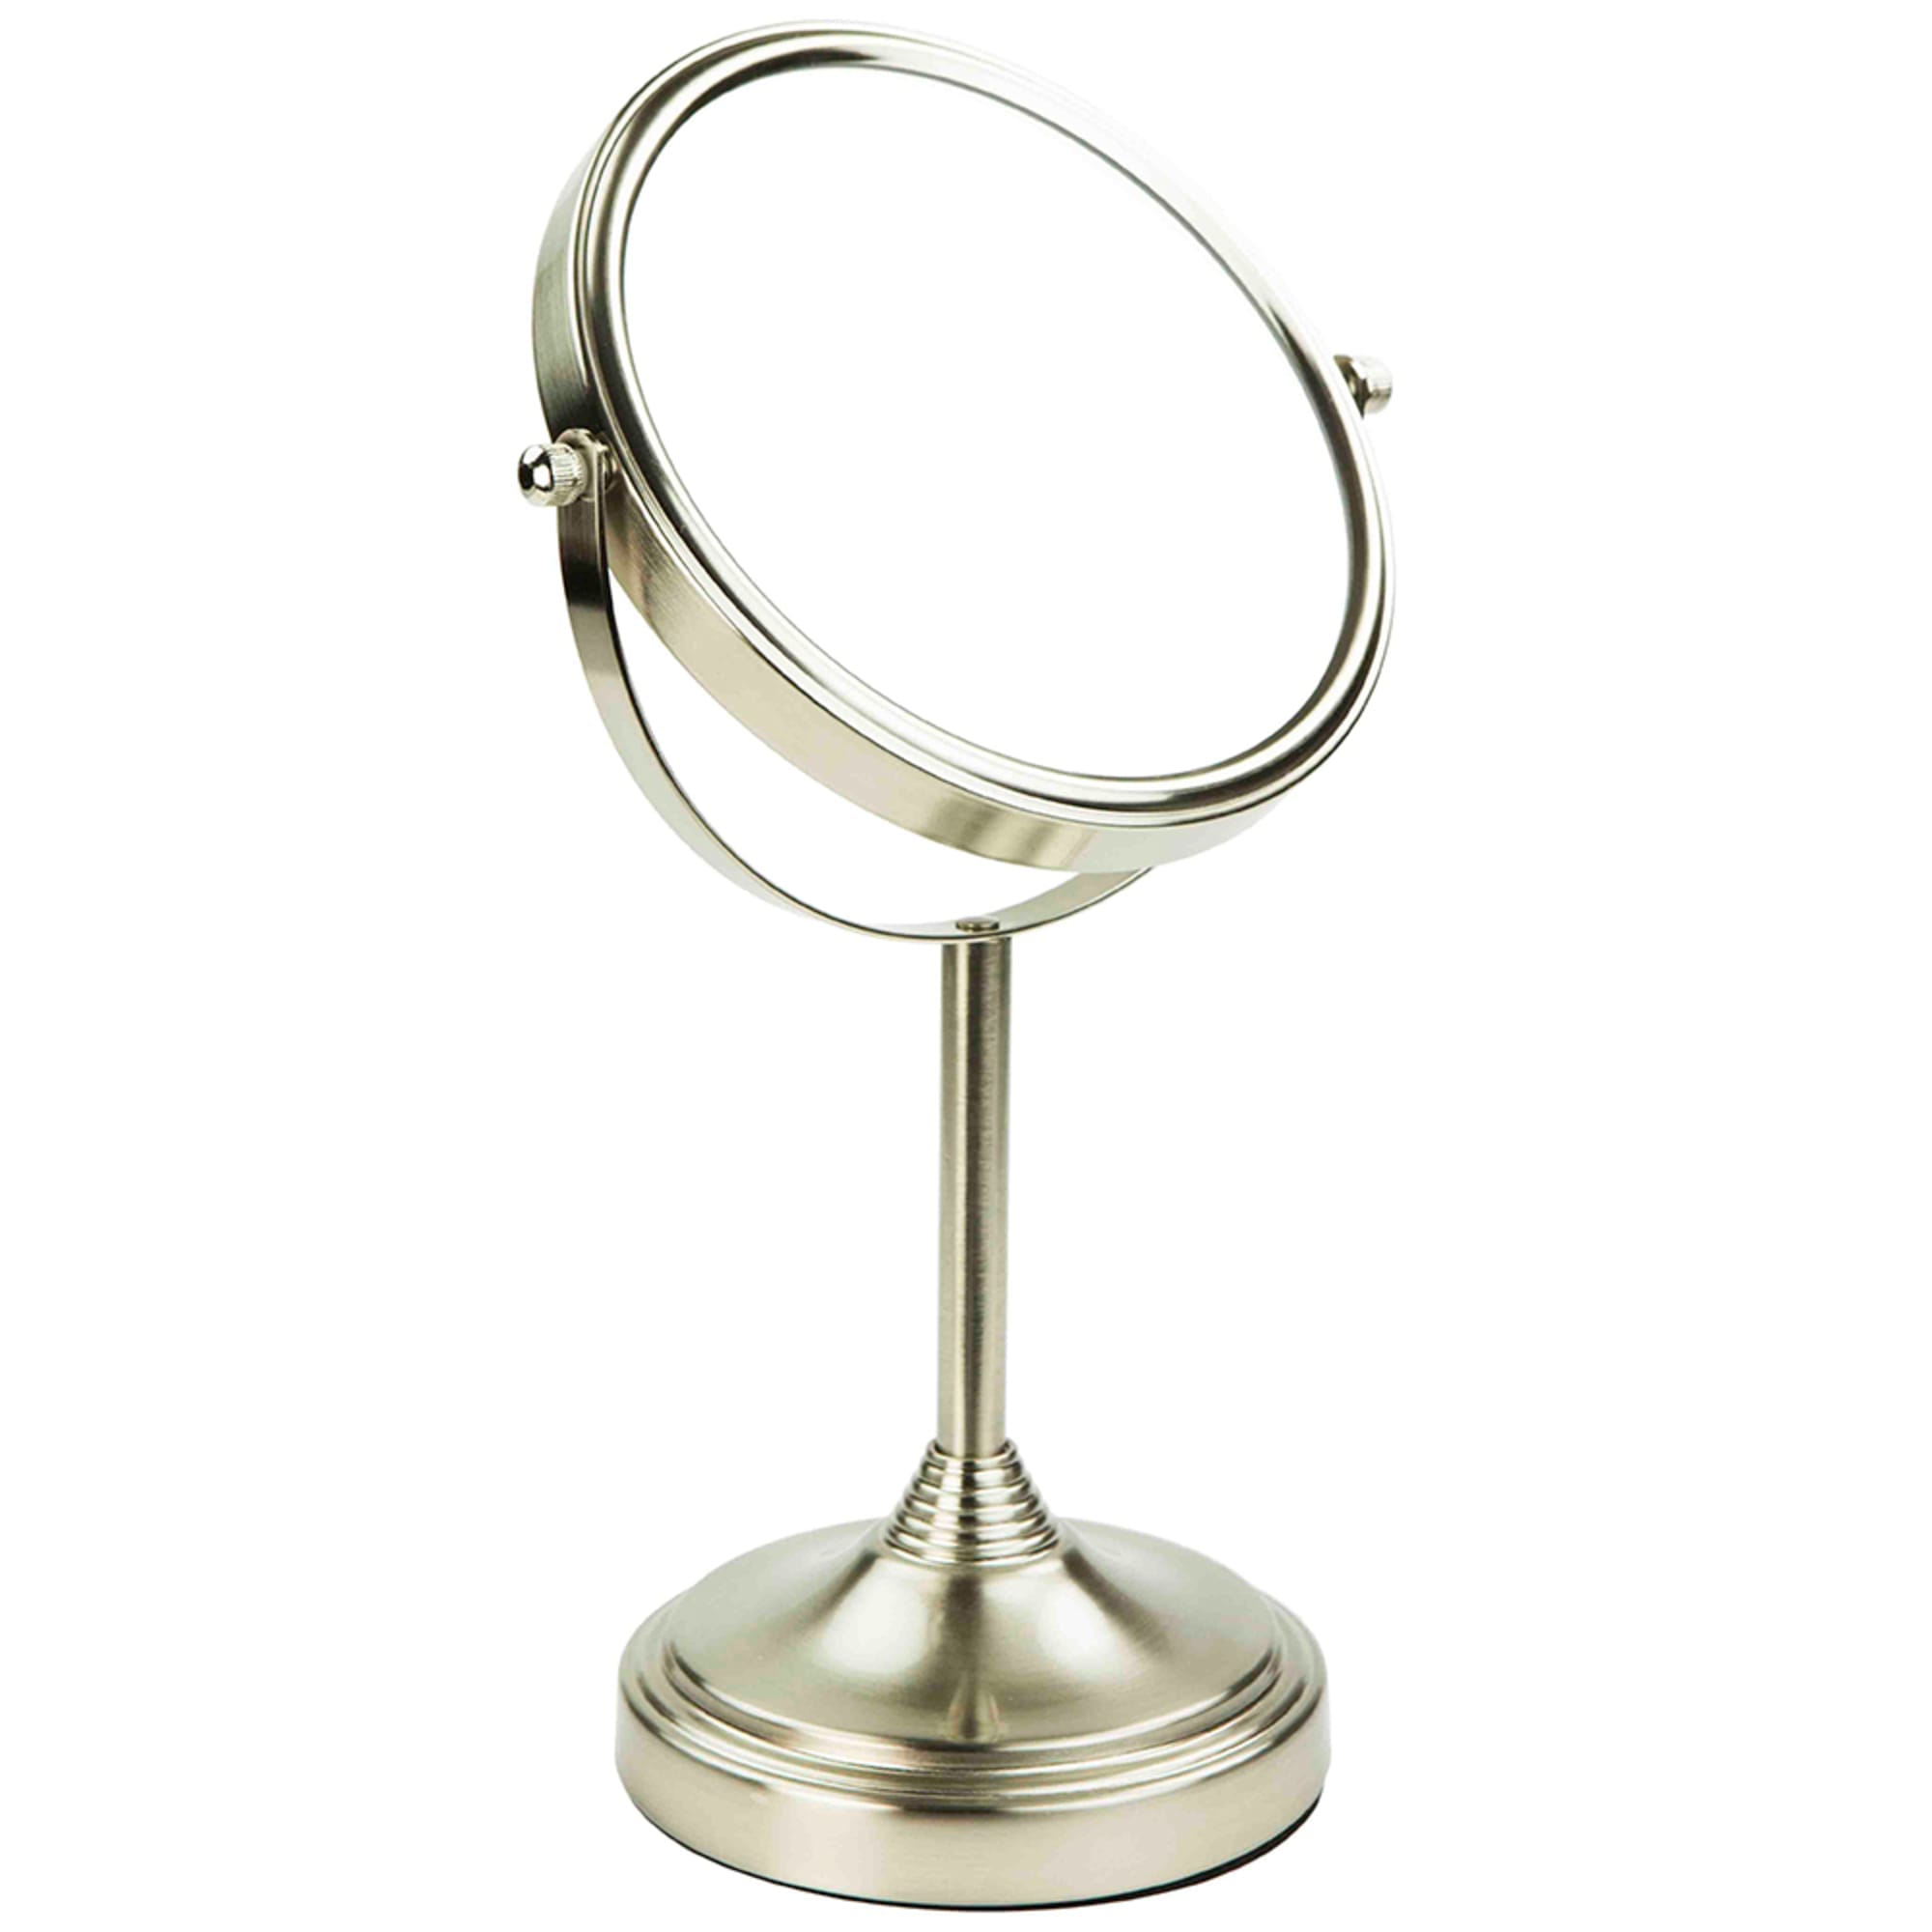 Home Basics Elizabeth Collection Cosmetic Mirror, Satin Nickel $15.00 EACH, CASE PACK OF 6